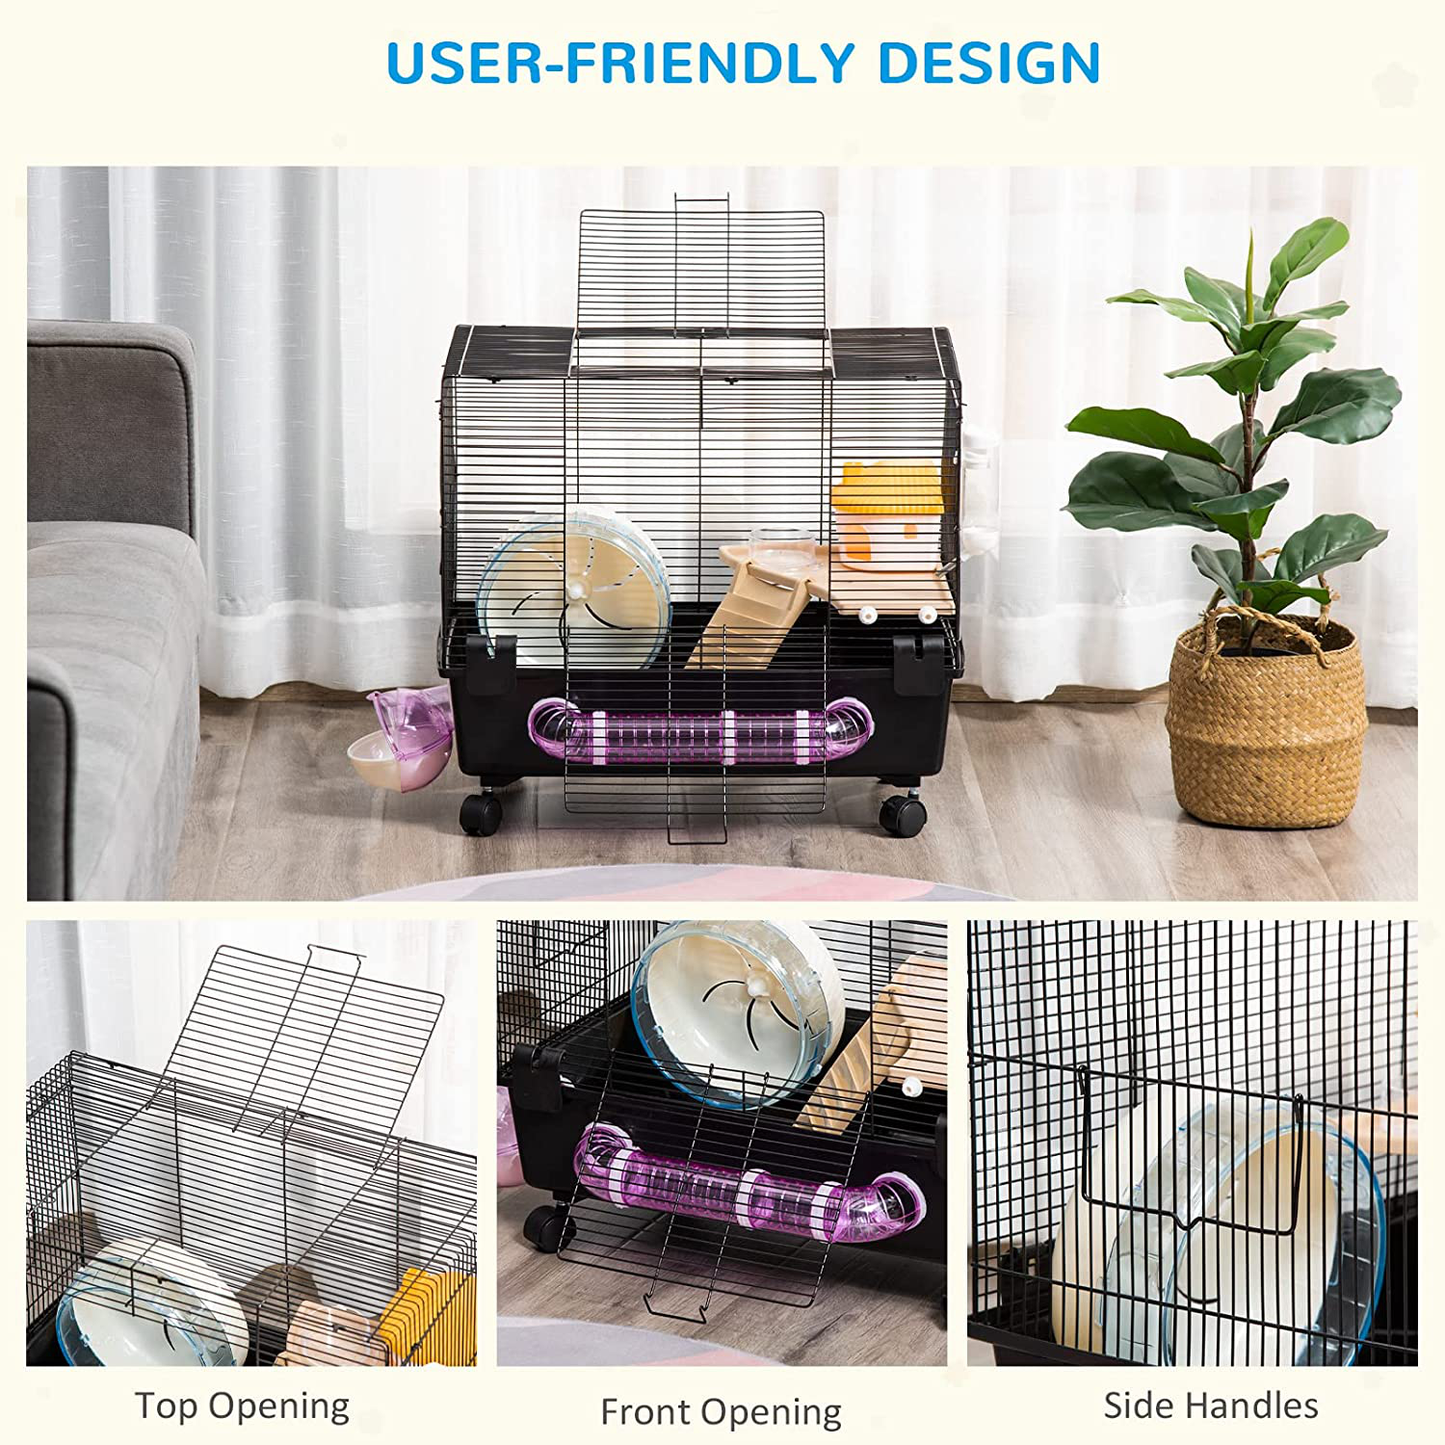 Pawhut Multi-Tier Hamster Cage, Small Animal Habitat for Hamsters and Gerbils, Mesh Wire Ventilated Enclosure with Exercise Wheel, Water Bottle, and Food Dishes